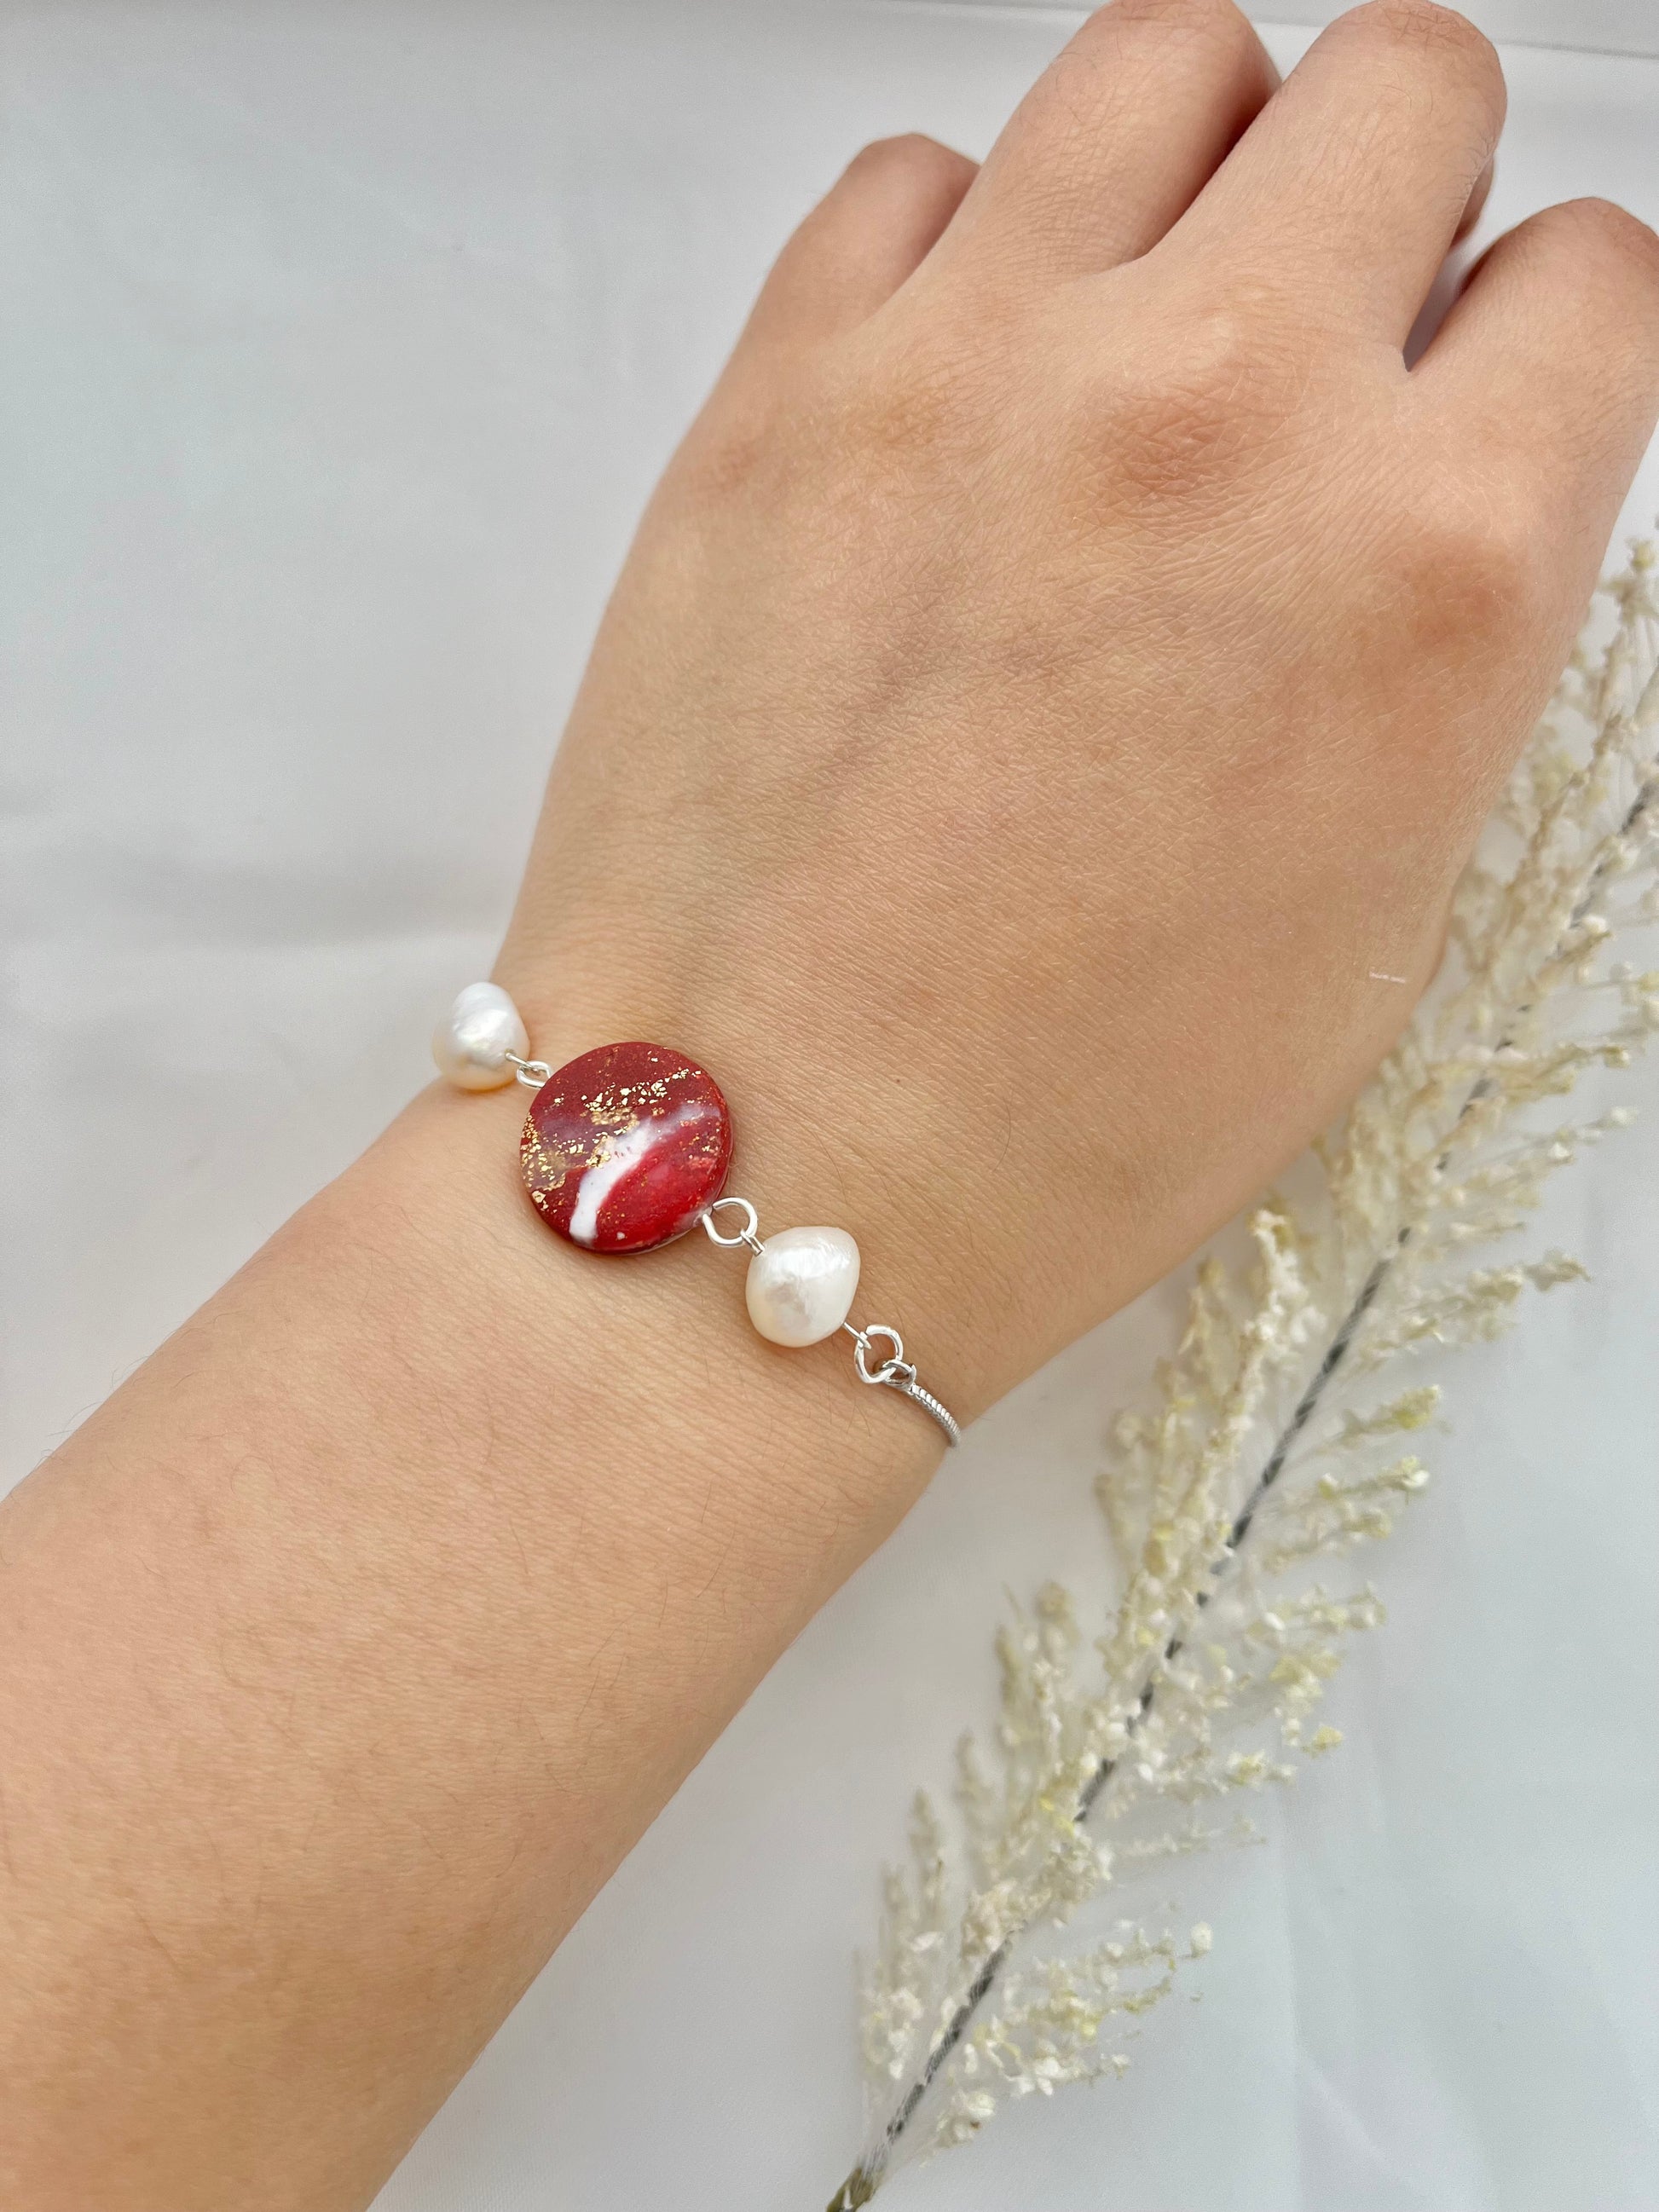 A rhodium plated bracelet with a dark red clay circle with freshwater pearls on either side on a hand